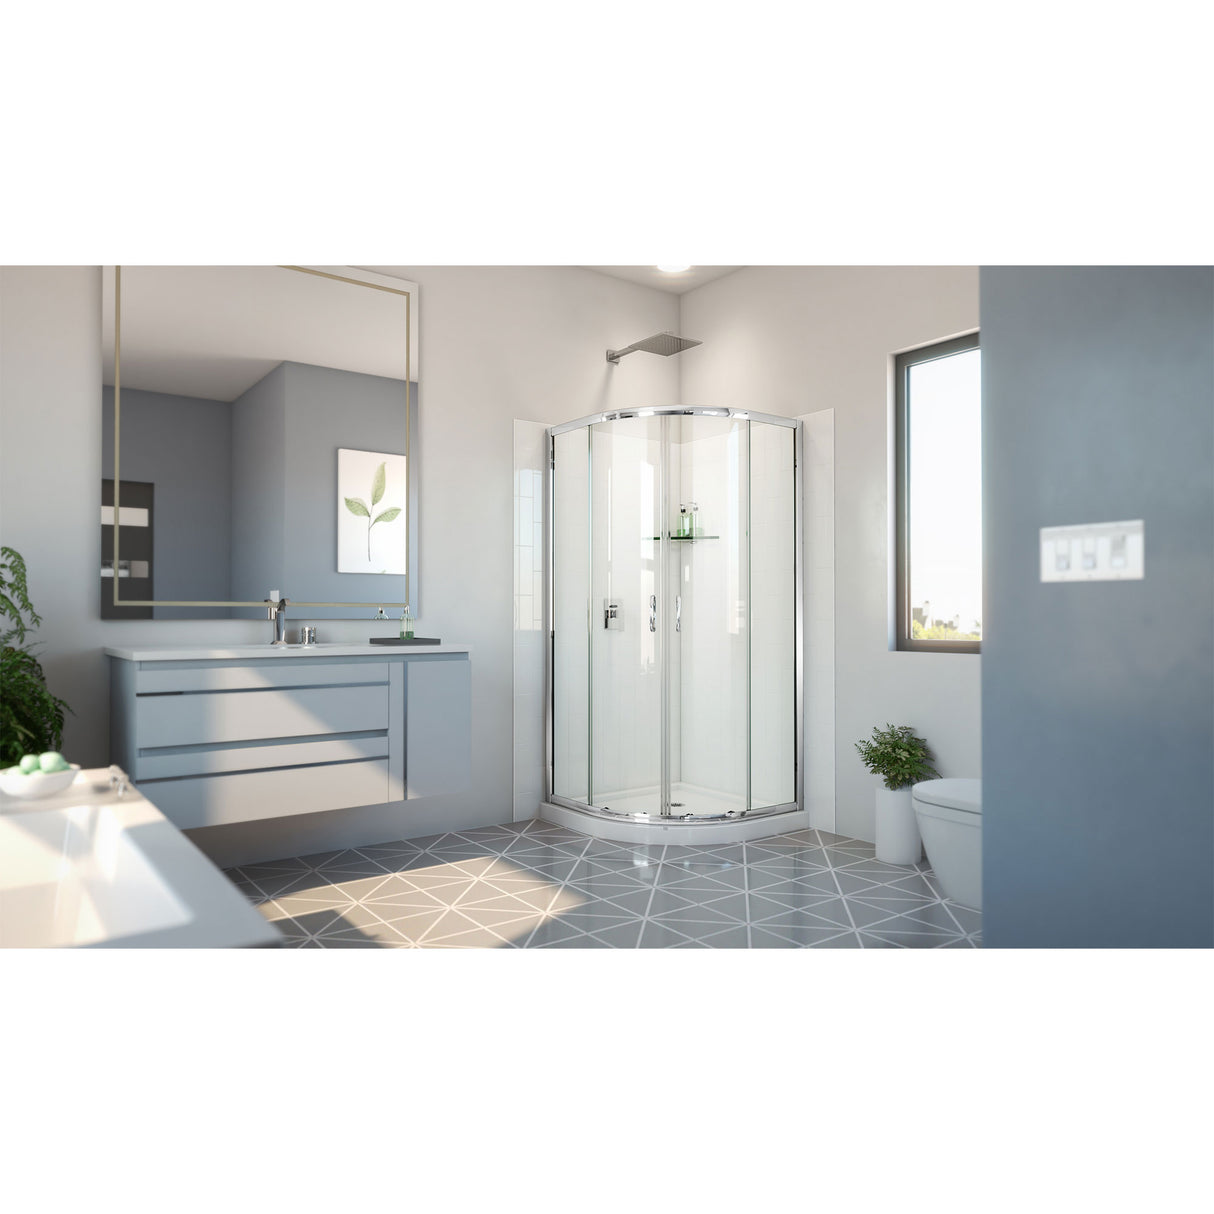 DreamLine Prime 38 in. x 38 in. x 78 3/4 in. H Shower Enclosure, Base, and White Wall Kit in Chrome and Clear Glass